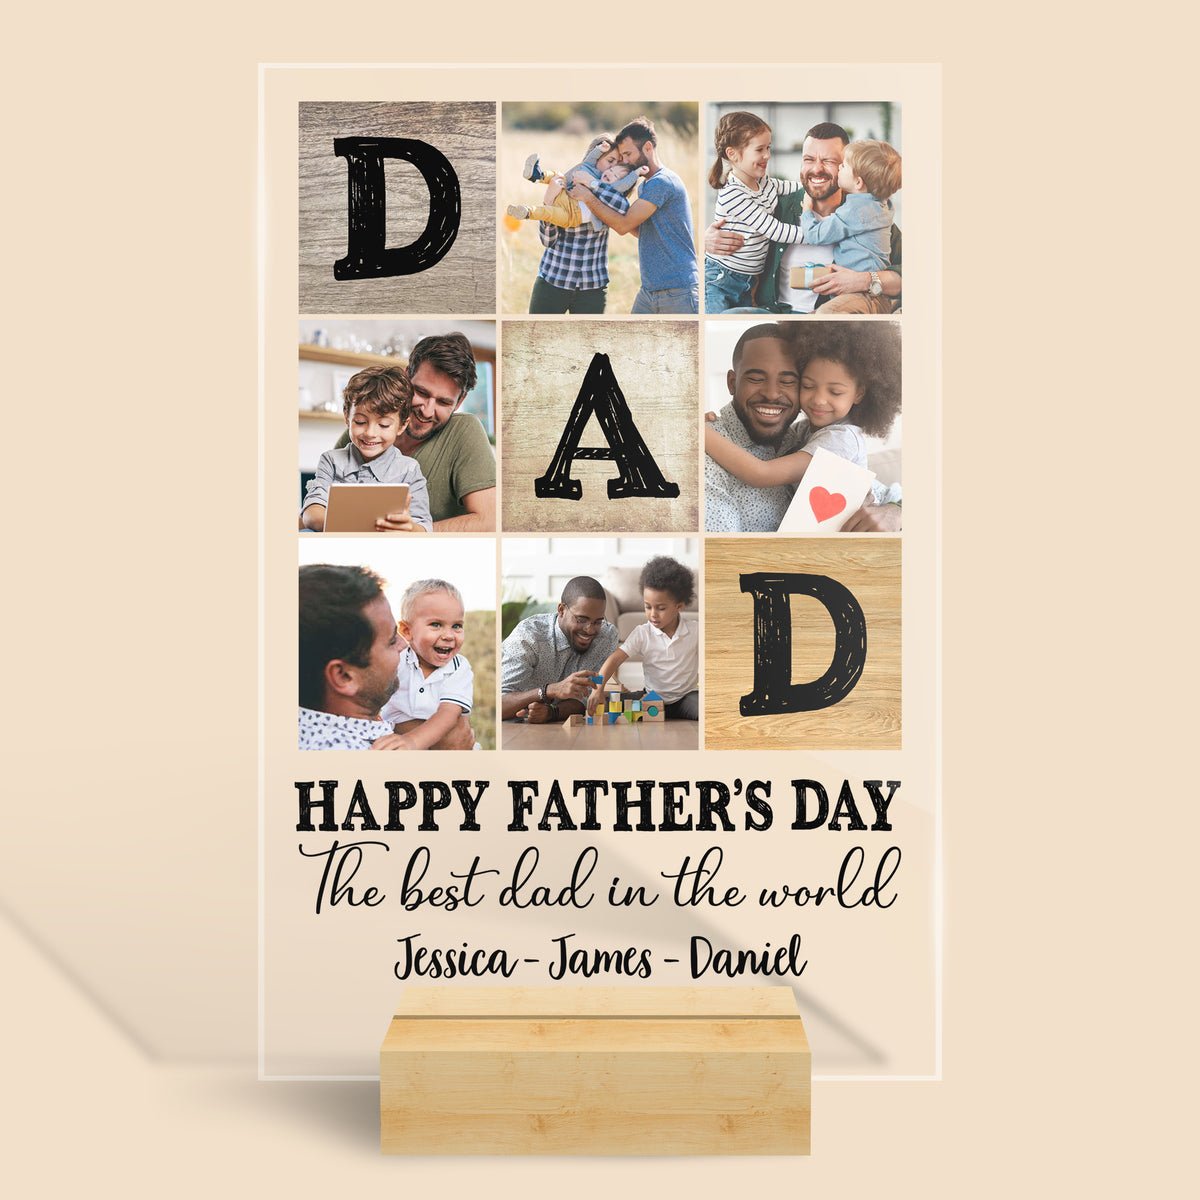 Dad - Happy Father's Day - Personalized Acrylic Plaque - Best Gift For Father - Giftago